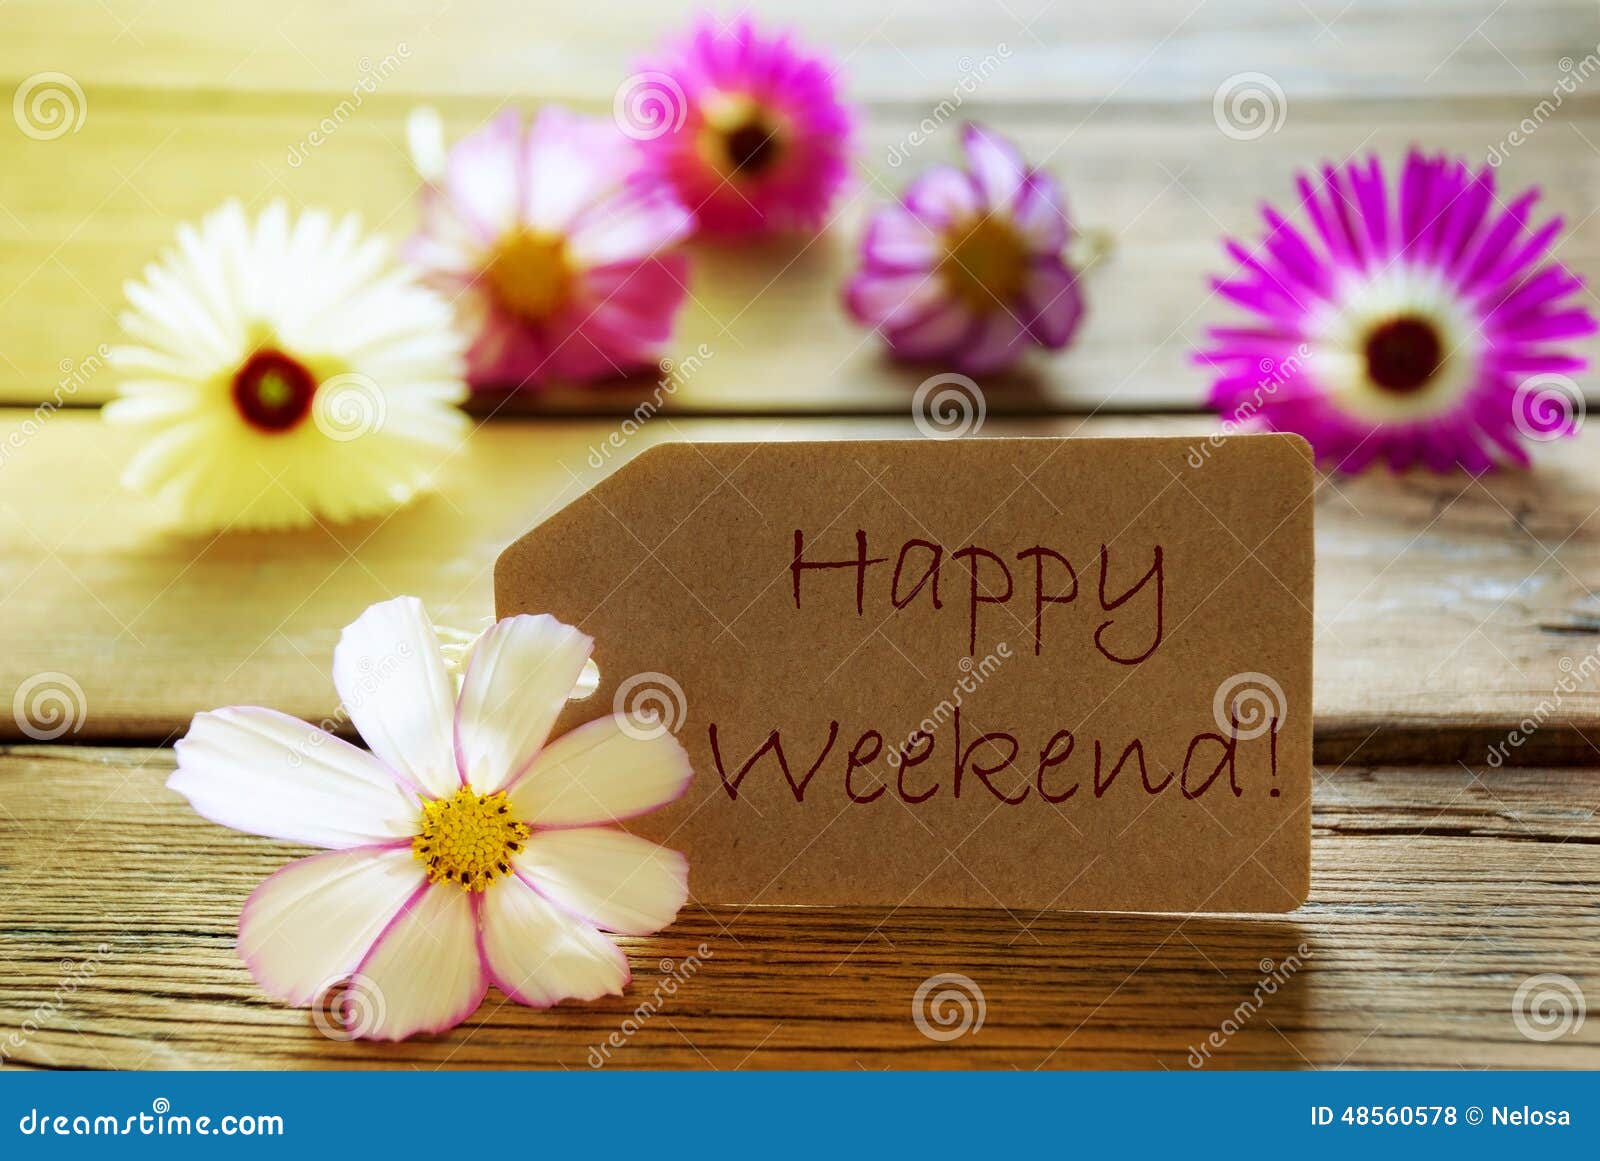 sunny label text happy weekend with cosmea blossoms